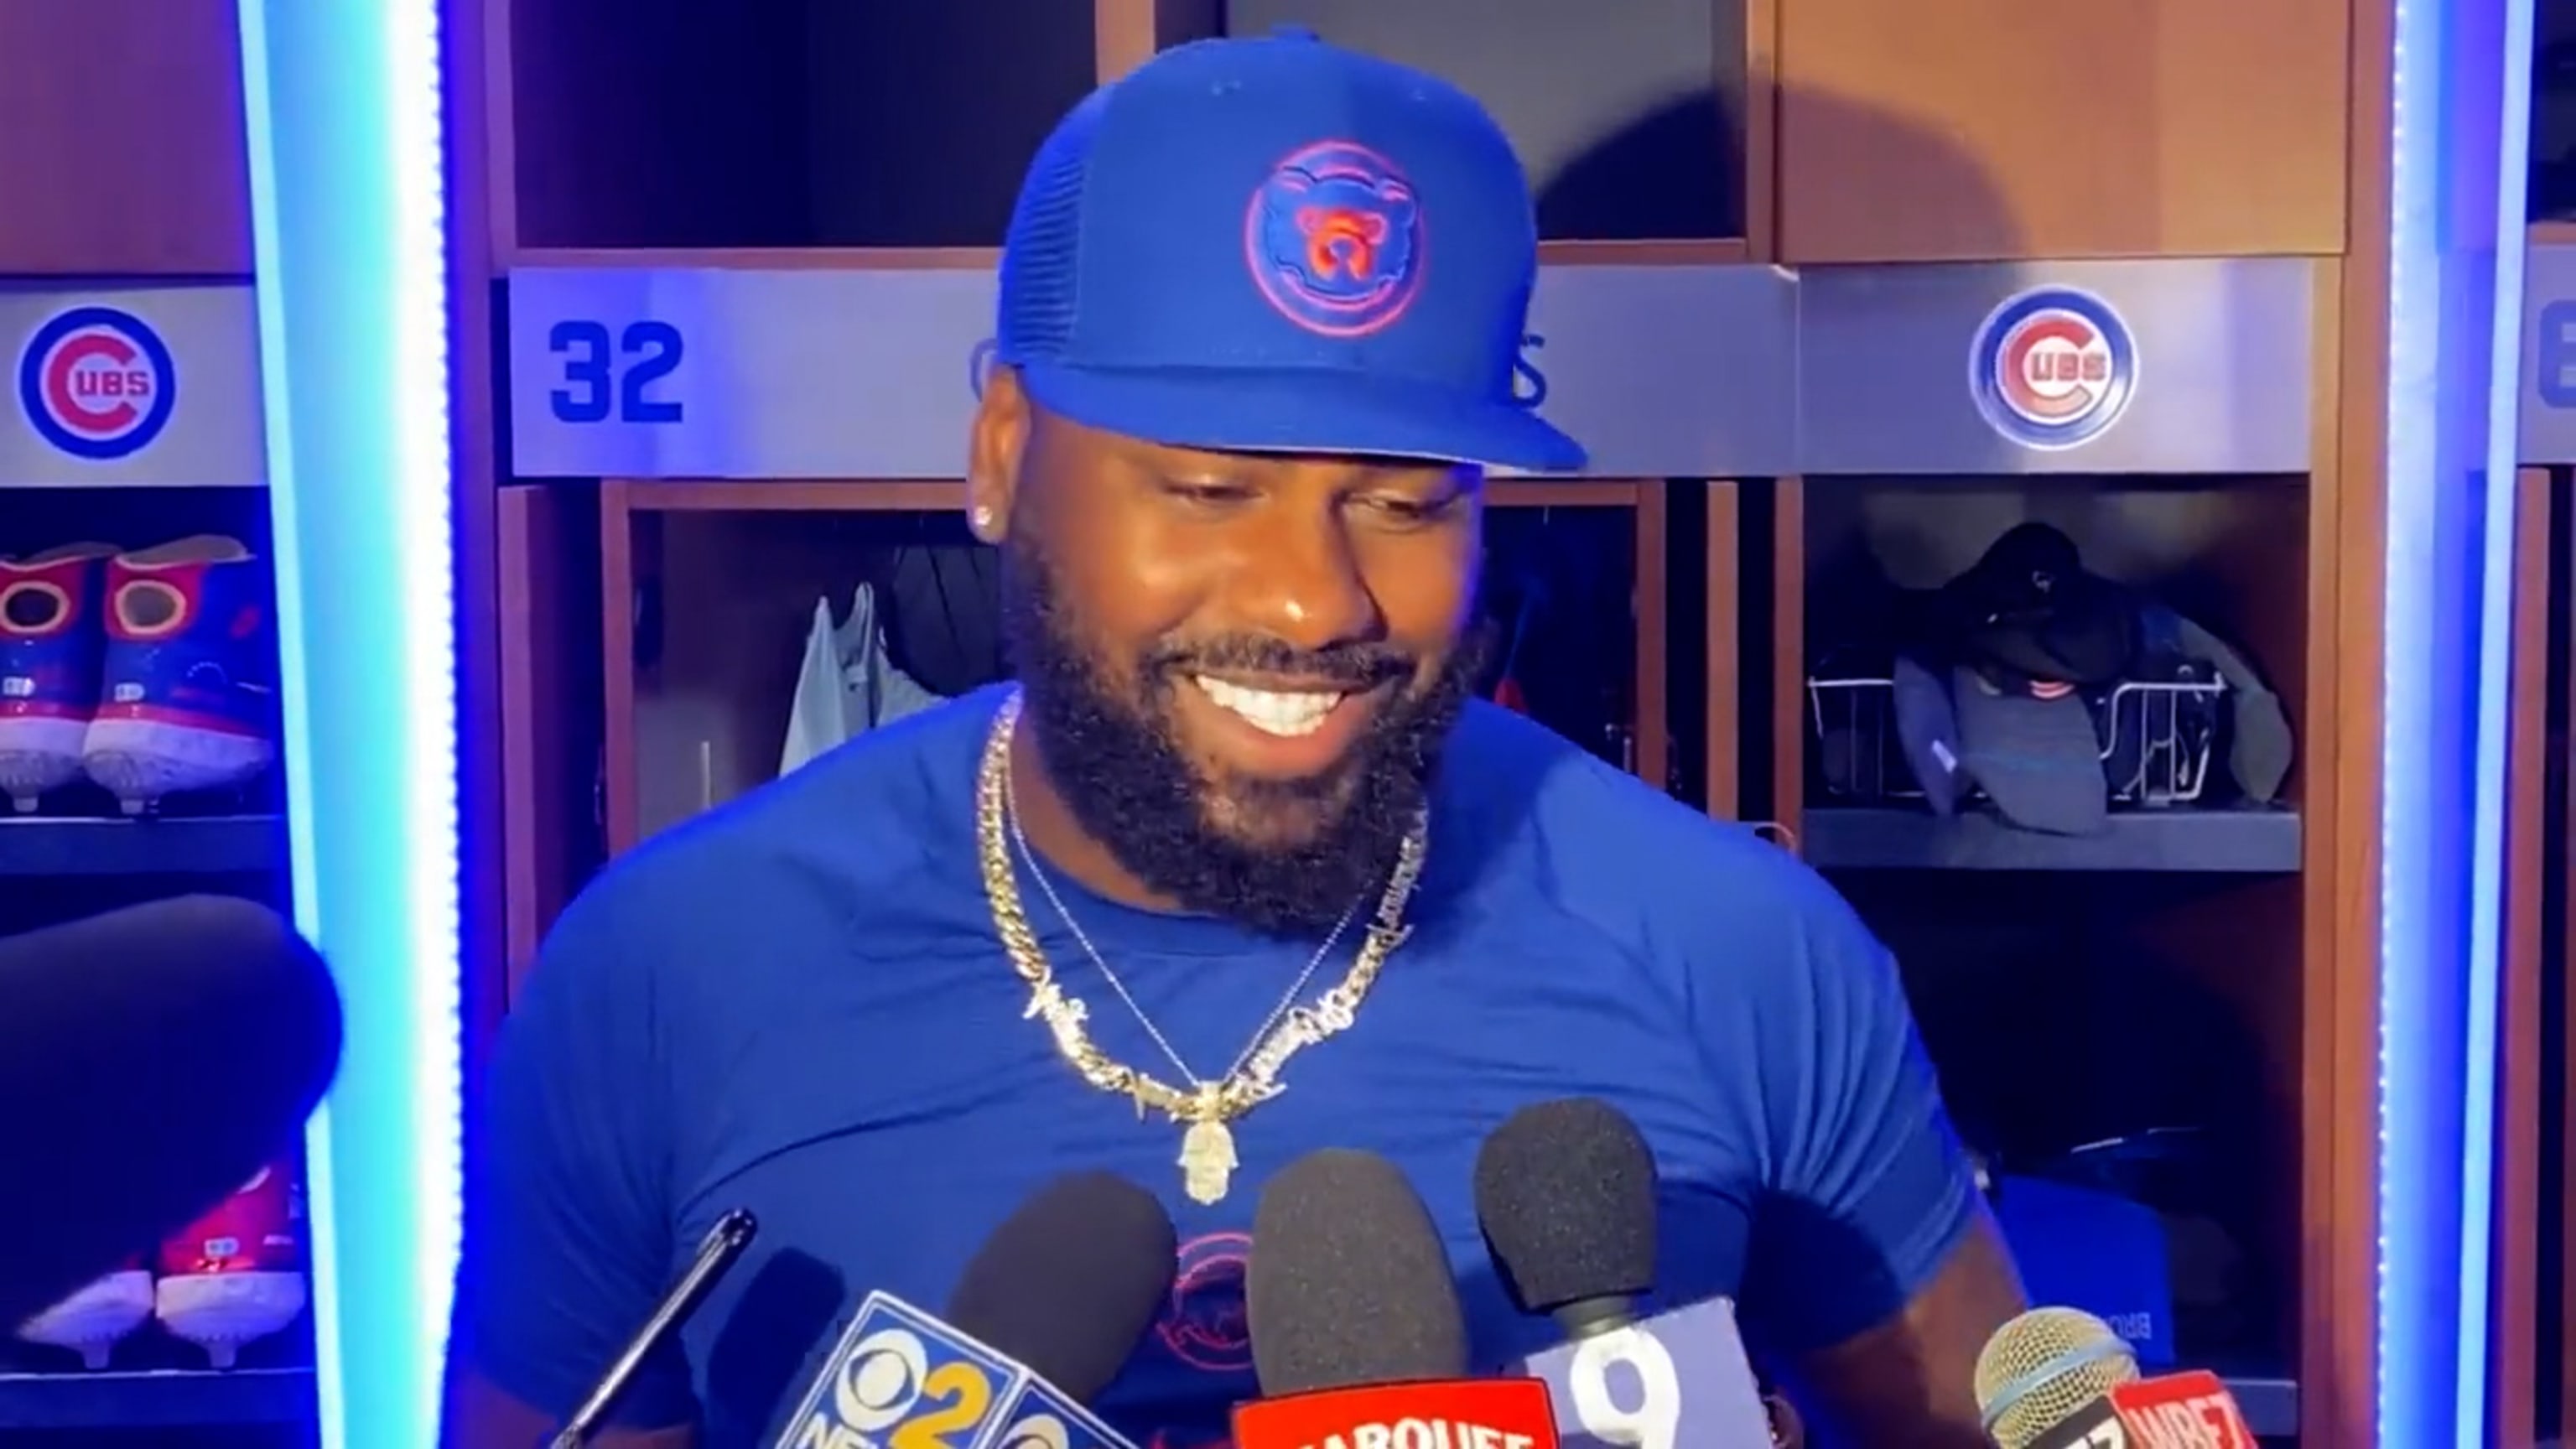 Cubs face a difficult roster decision with Franmil Reyes